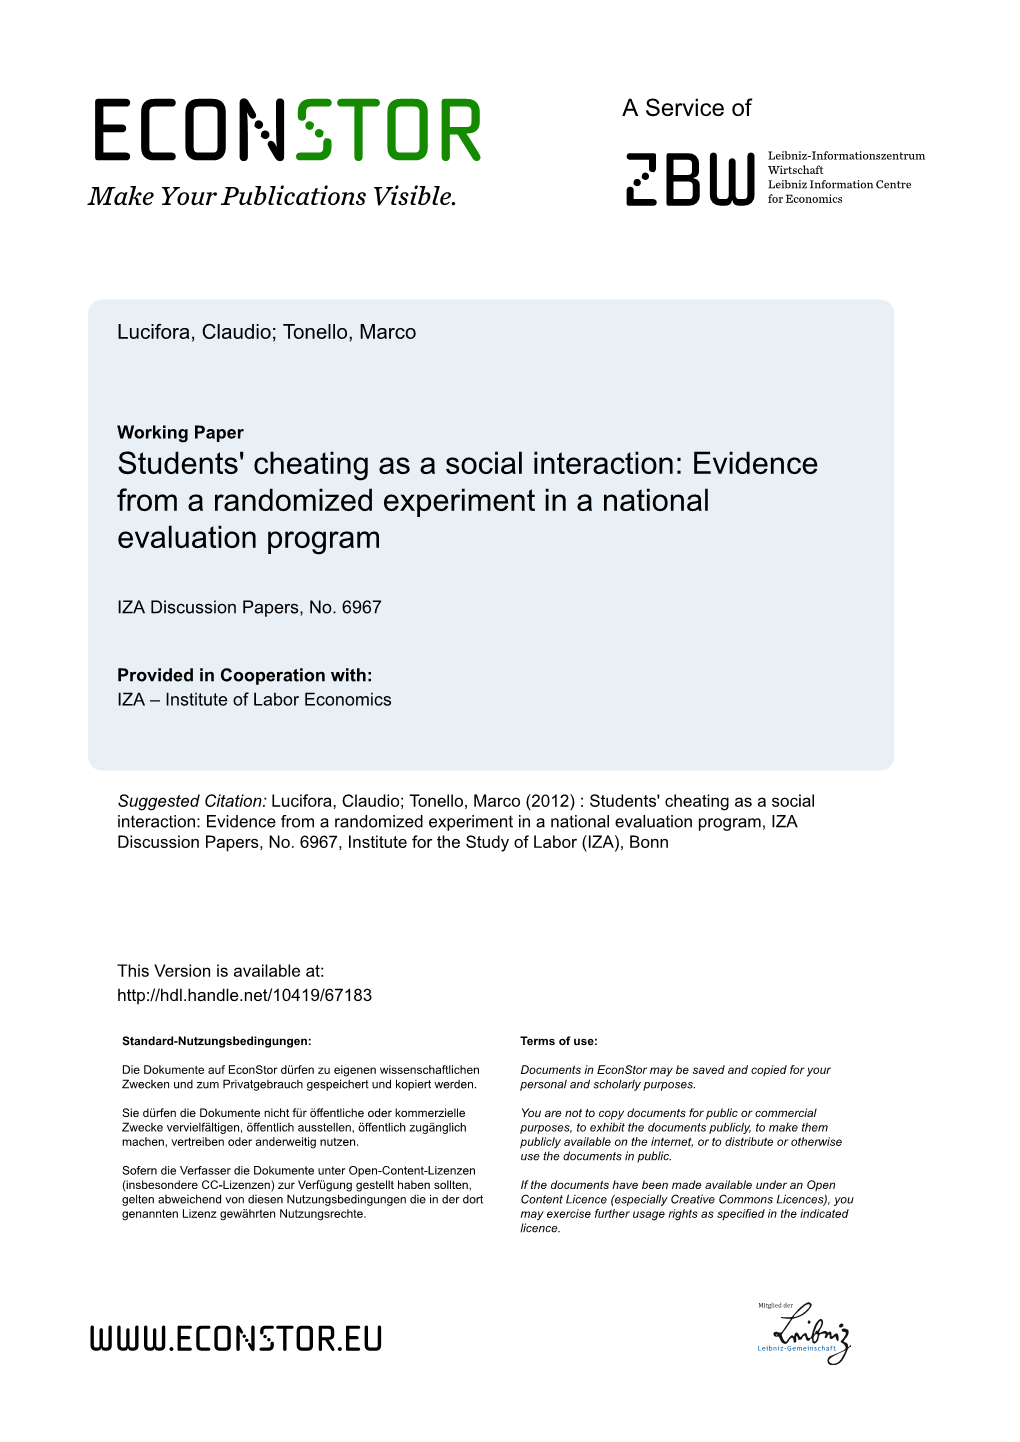 Students' Cheating As a Social Interaction: Evidence from a Randomized Experiment in a National Evaluation Program